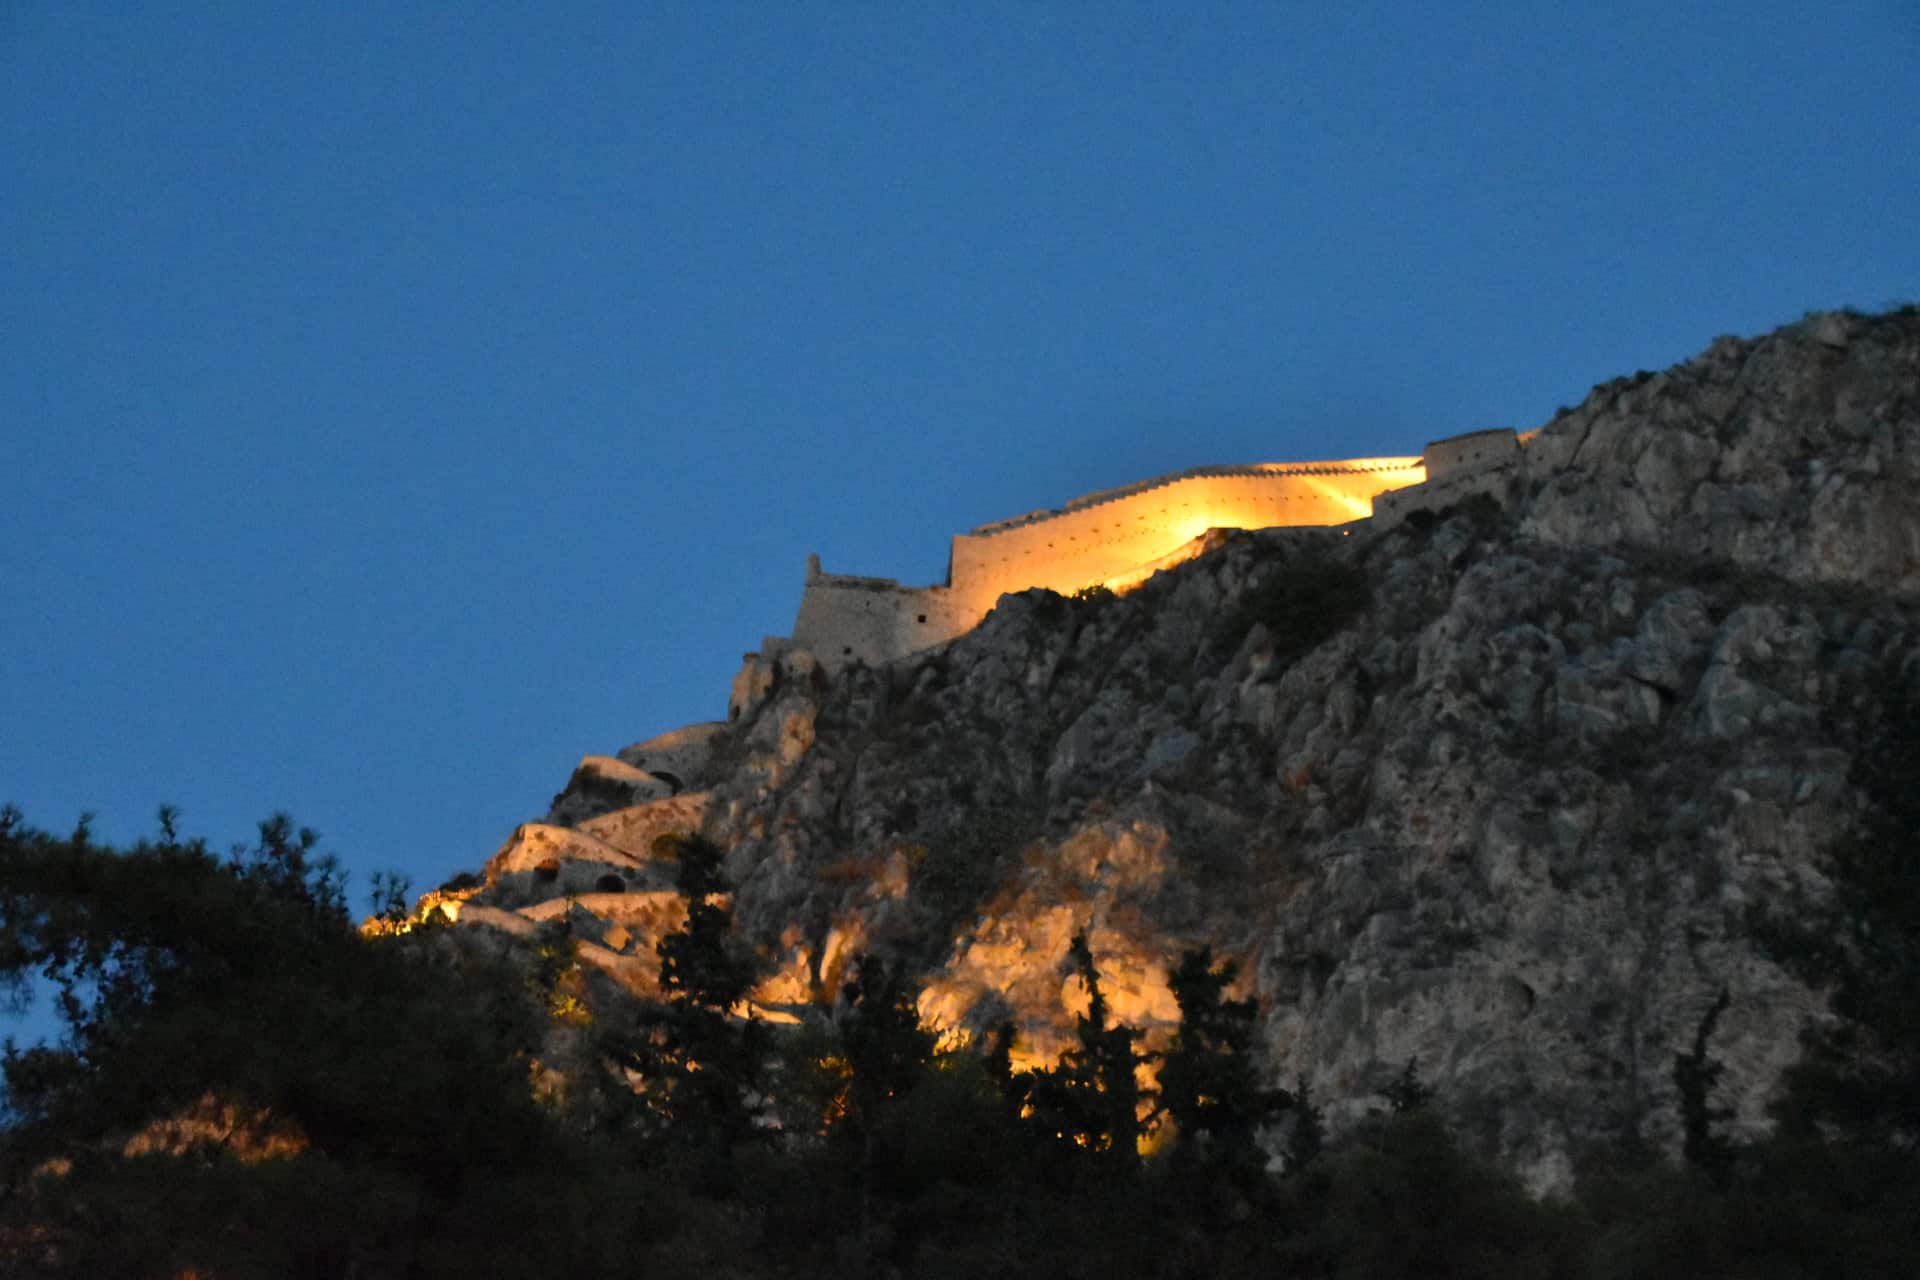 the fortress on the hill in Nafplio, Greece at night